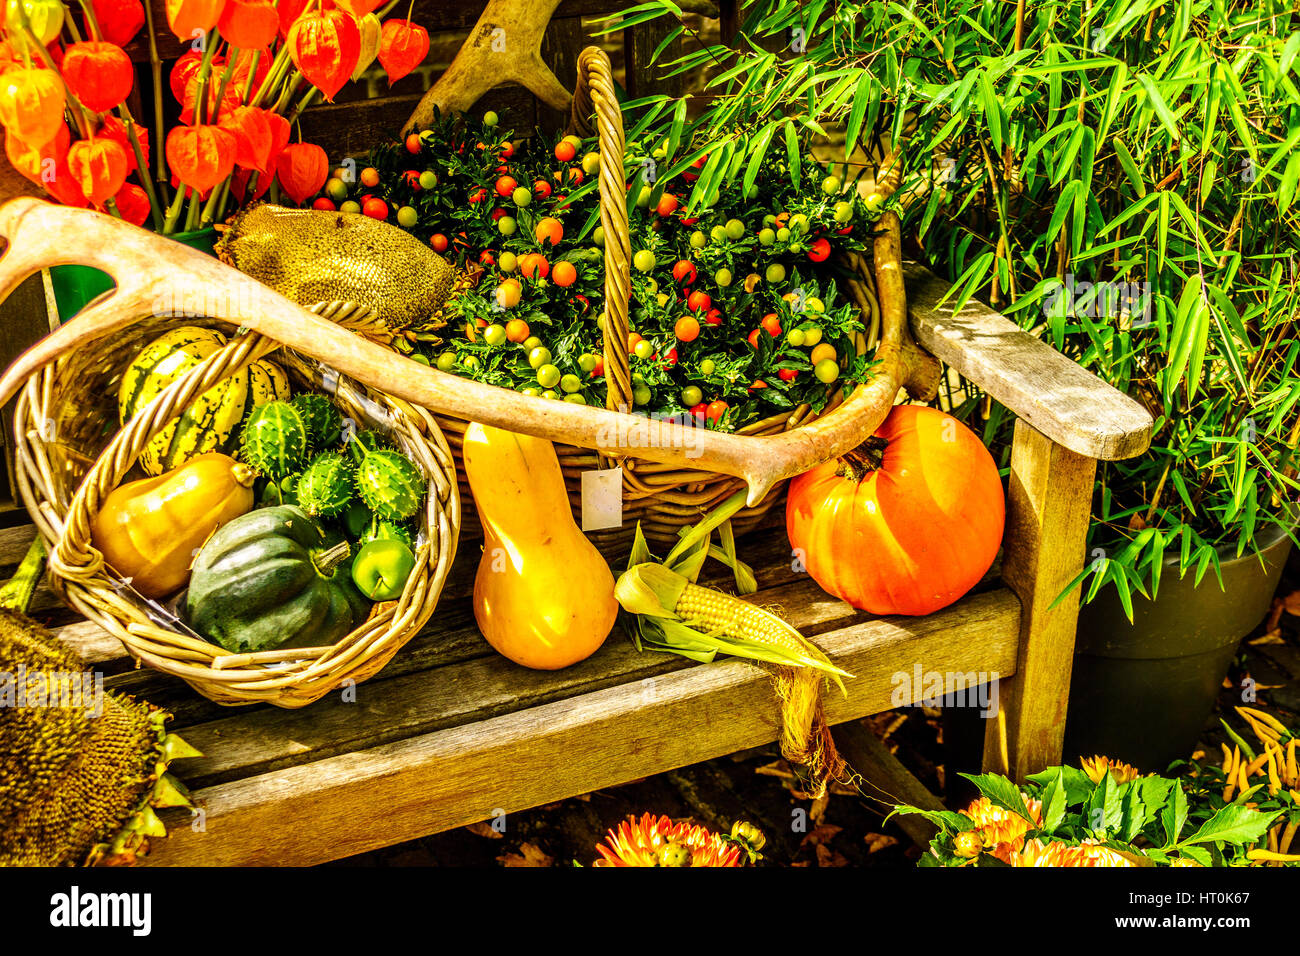 Autumn Basket or Fall Basket with Pumpkins, Butternut, Berries and other Colorful Fruits and vegetables Stock Photo